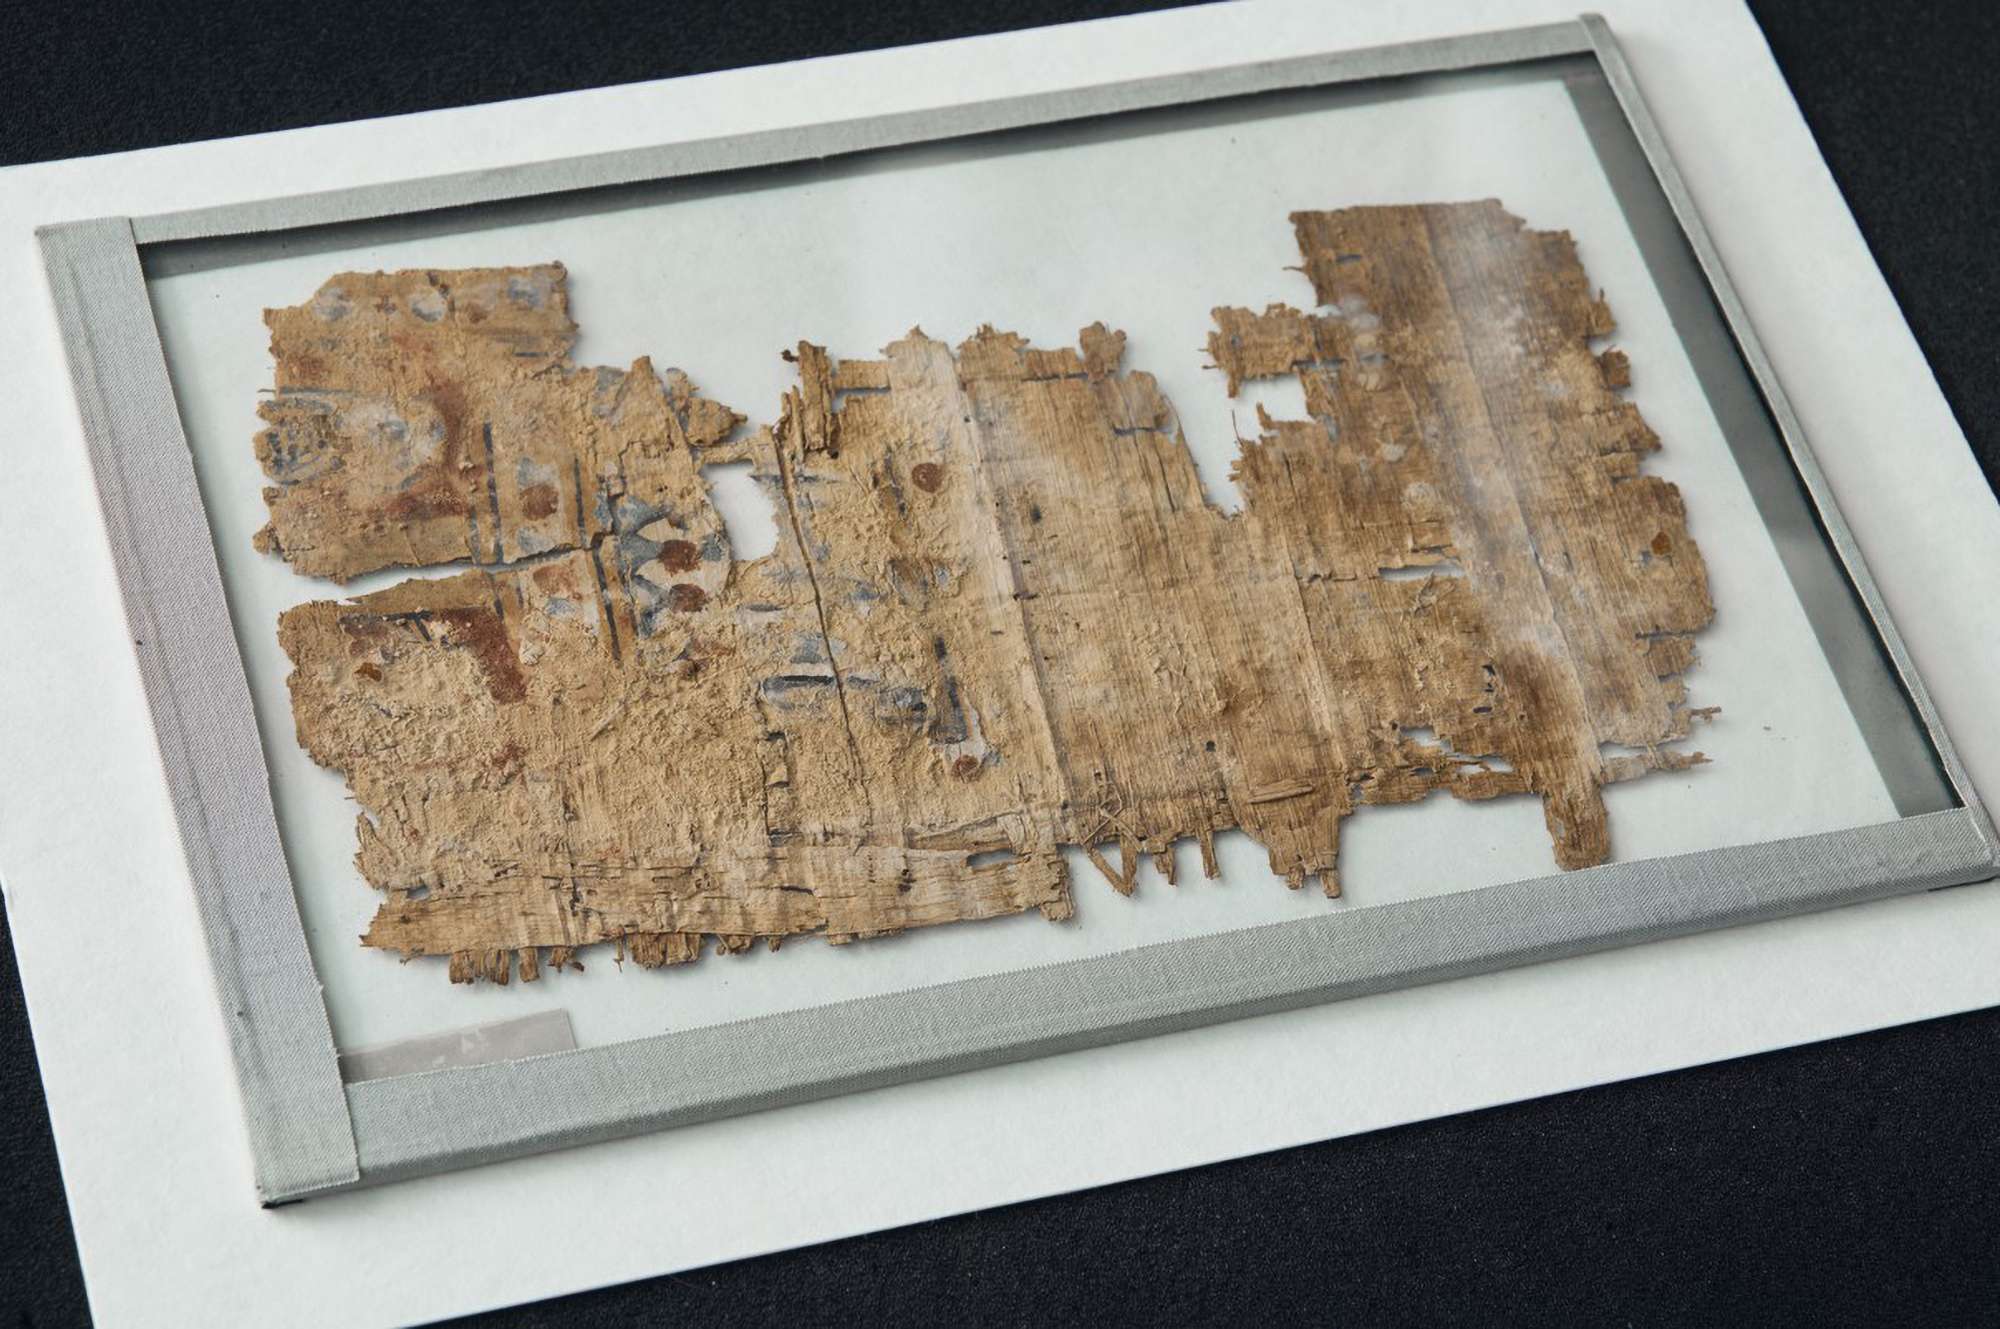 World’s Oldest Book Was About The Price Of Beer